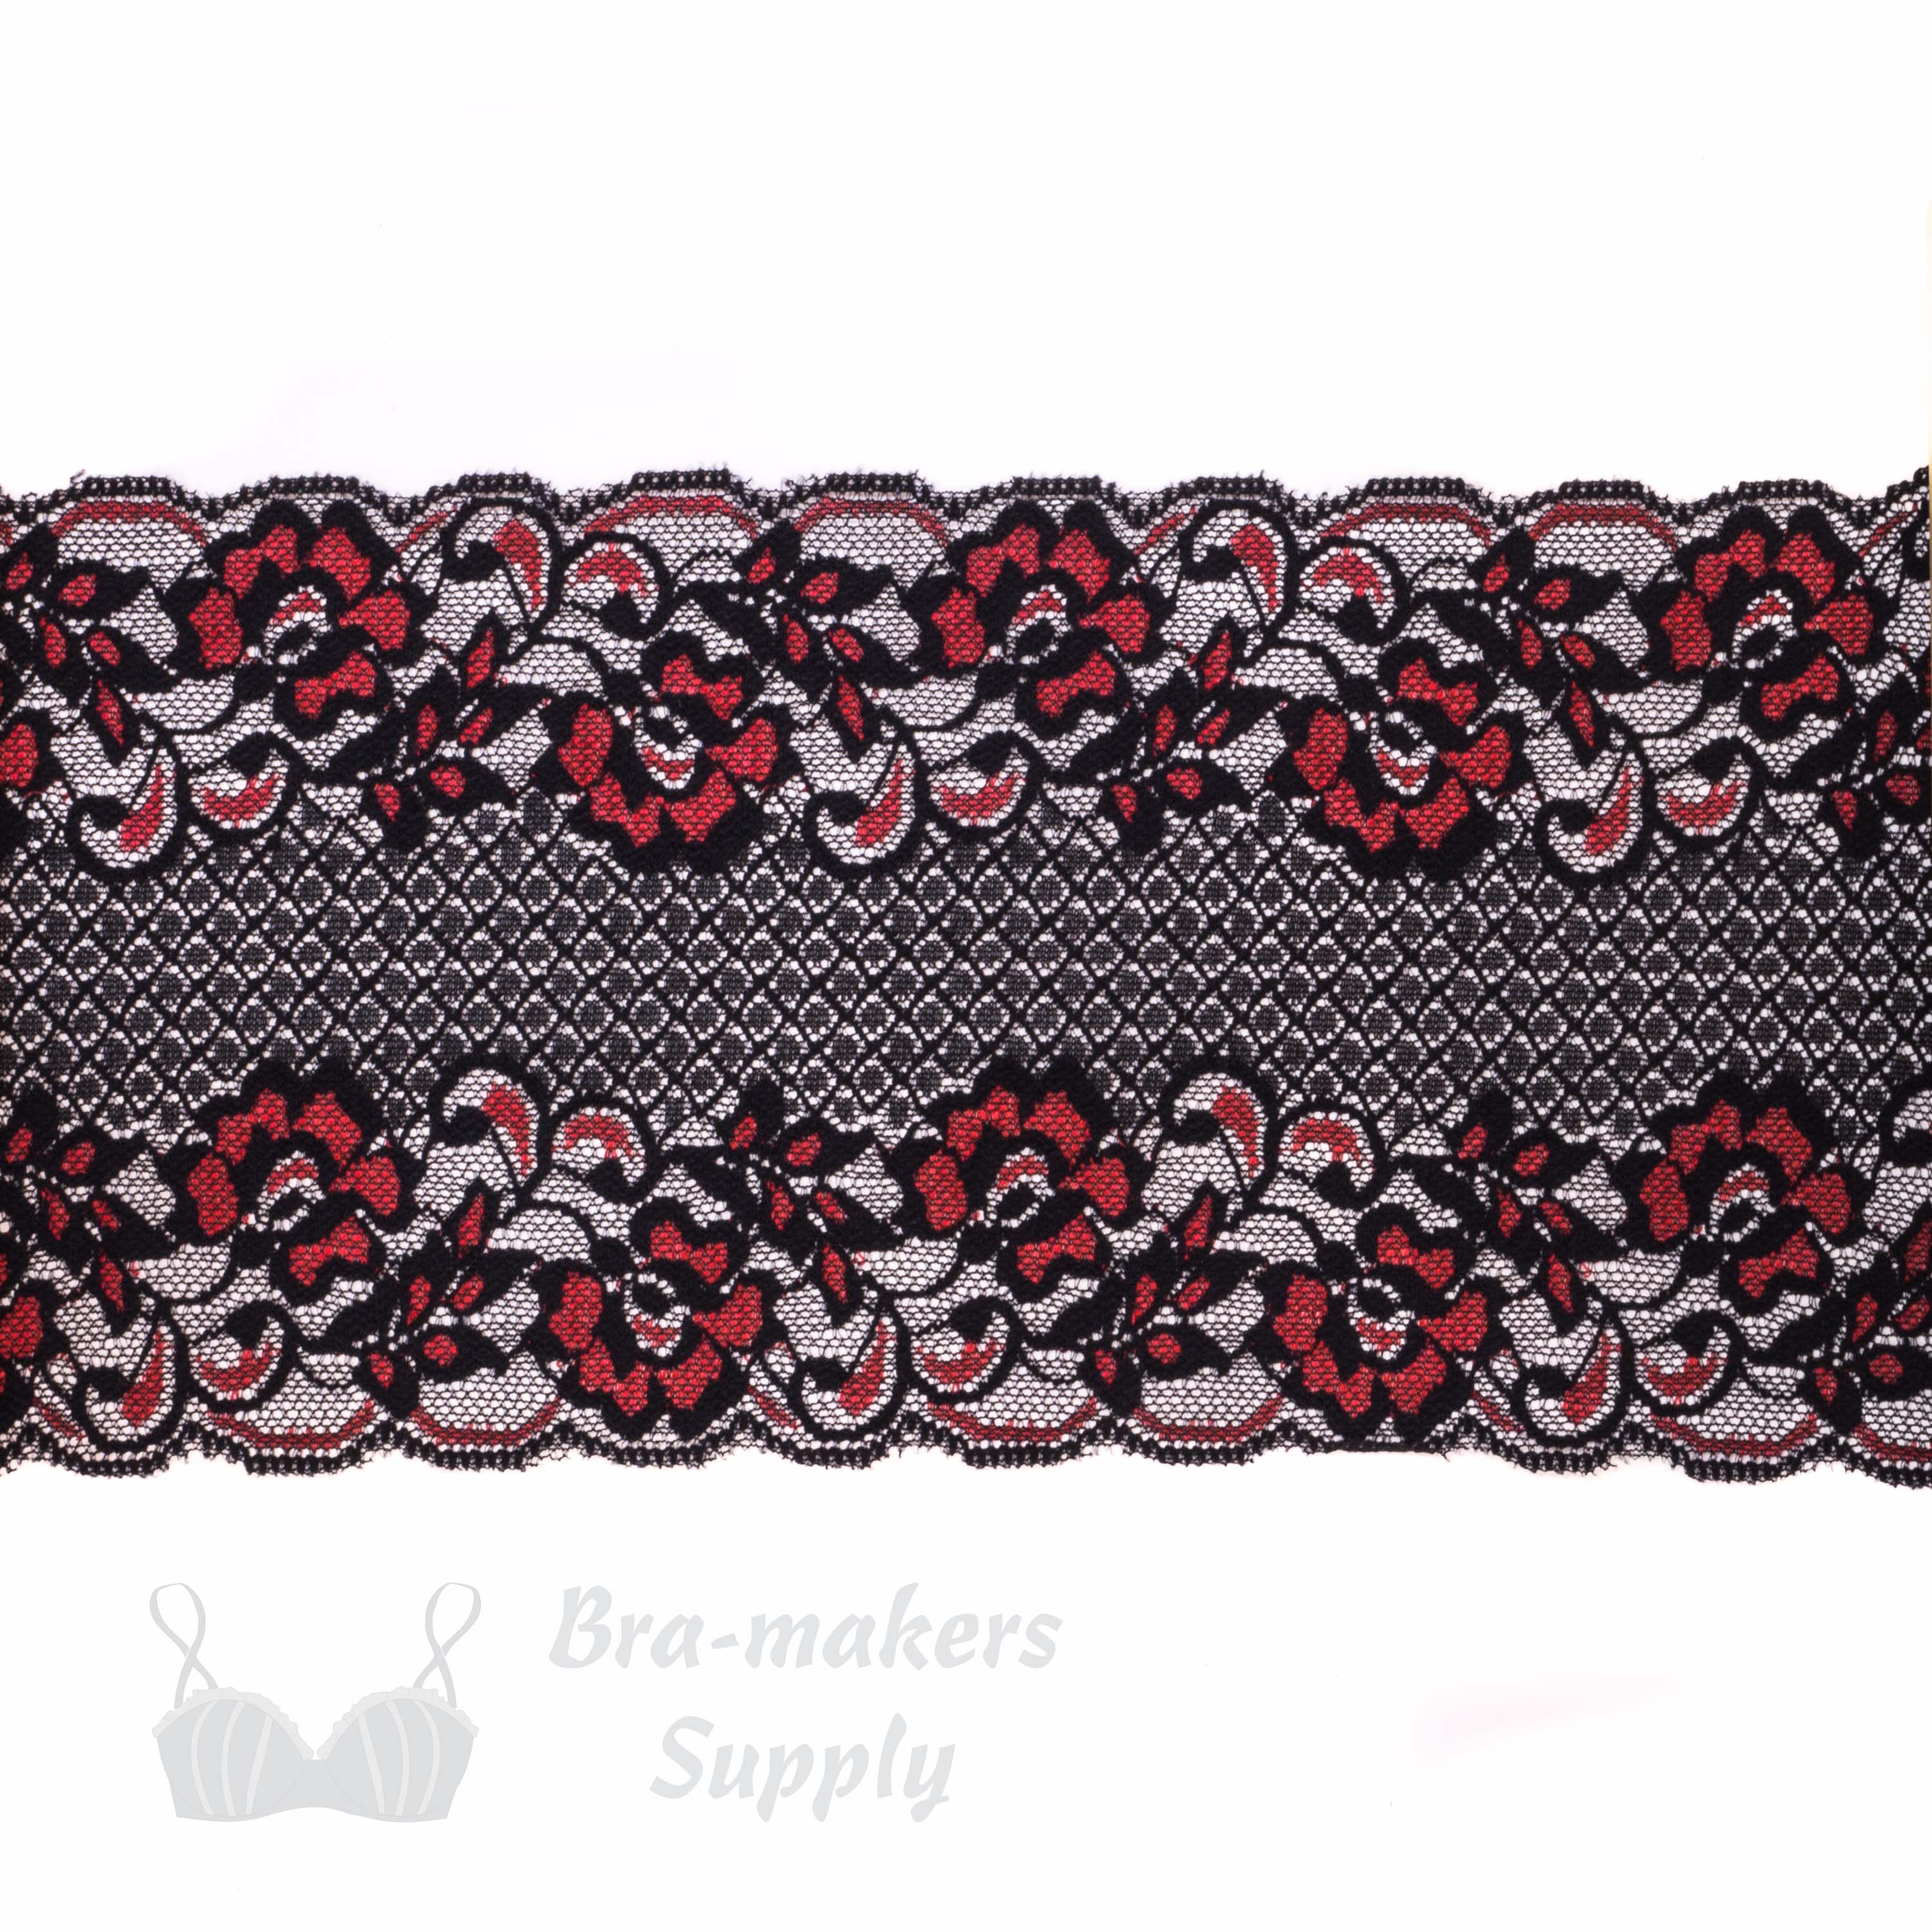 Five Inch Dark Red Black Floral Stretch Lace - Bra-Makers Supply